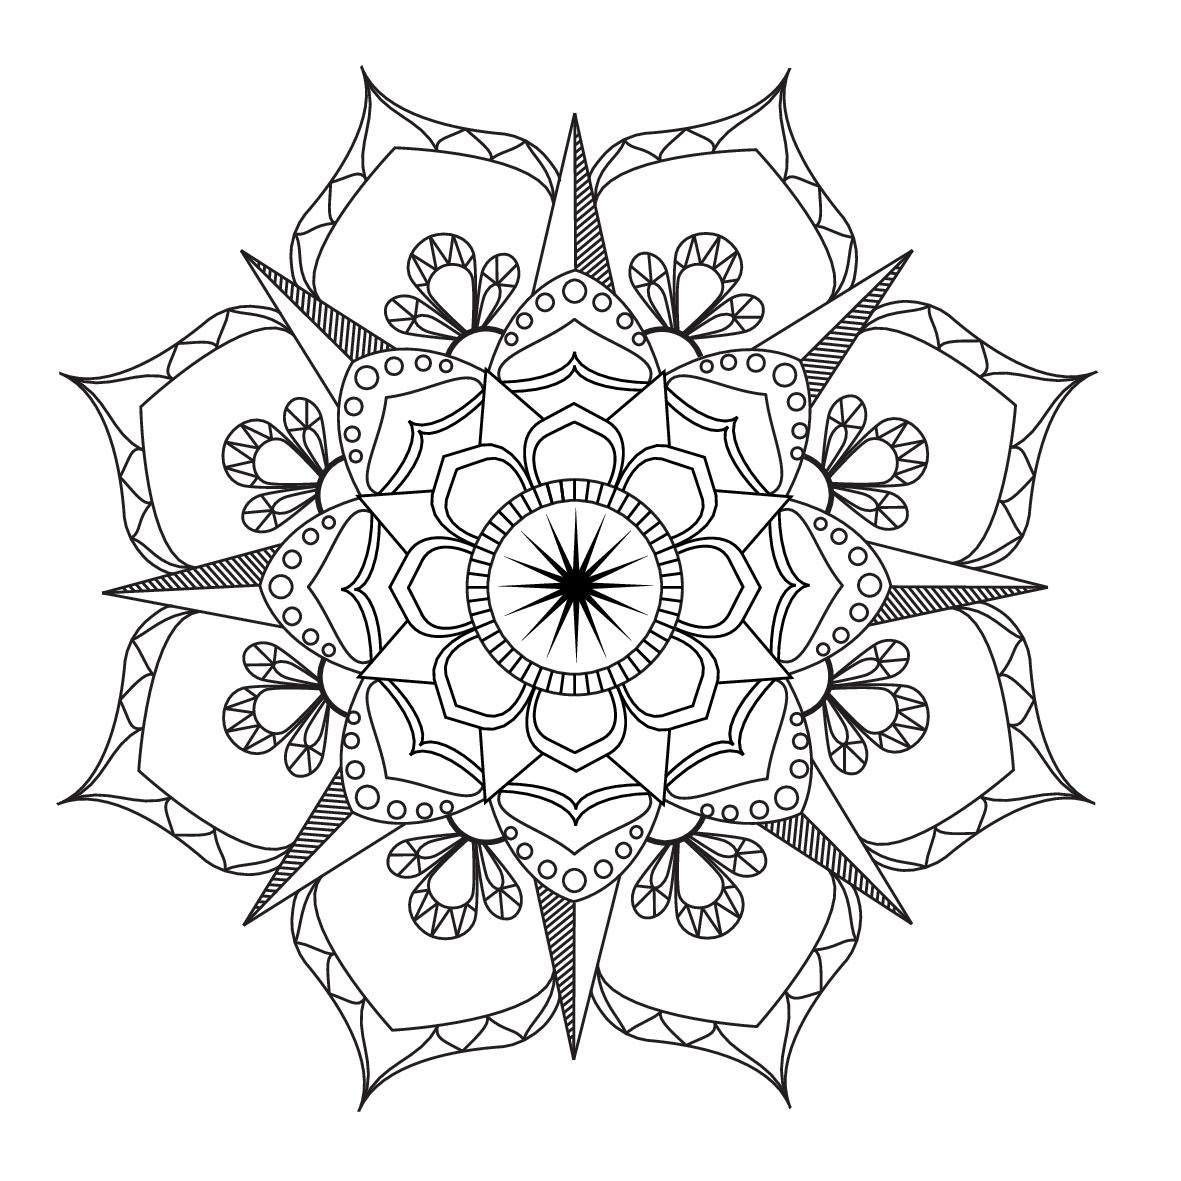 Flower Mandala Coloring Page Adult Coloring Art Therapy Pdf ...